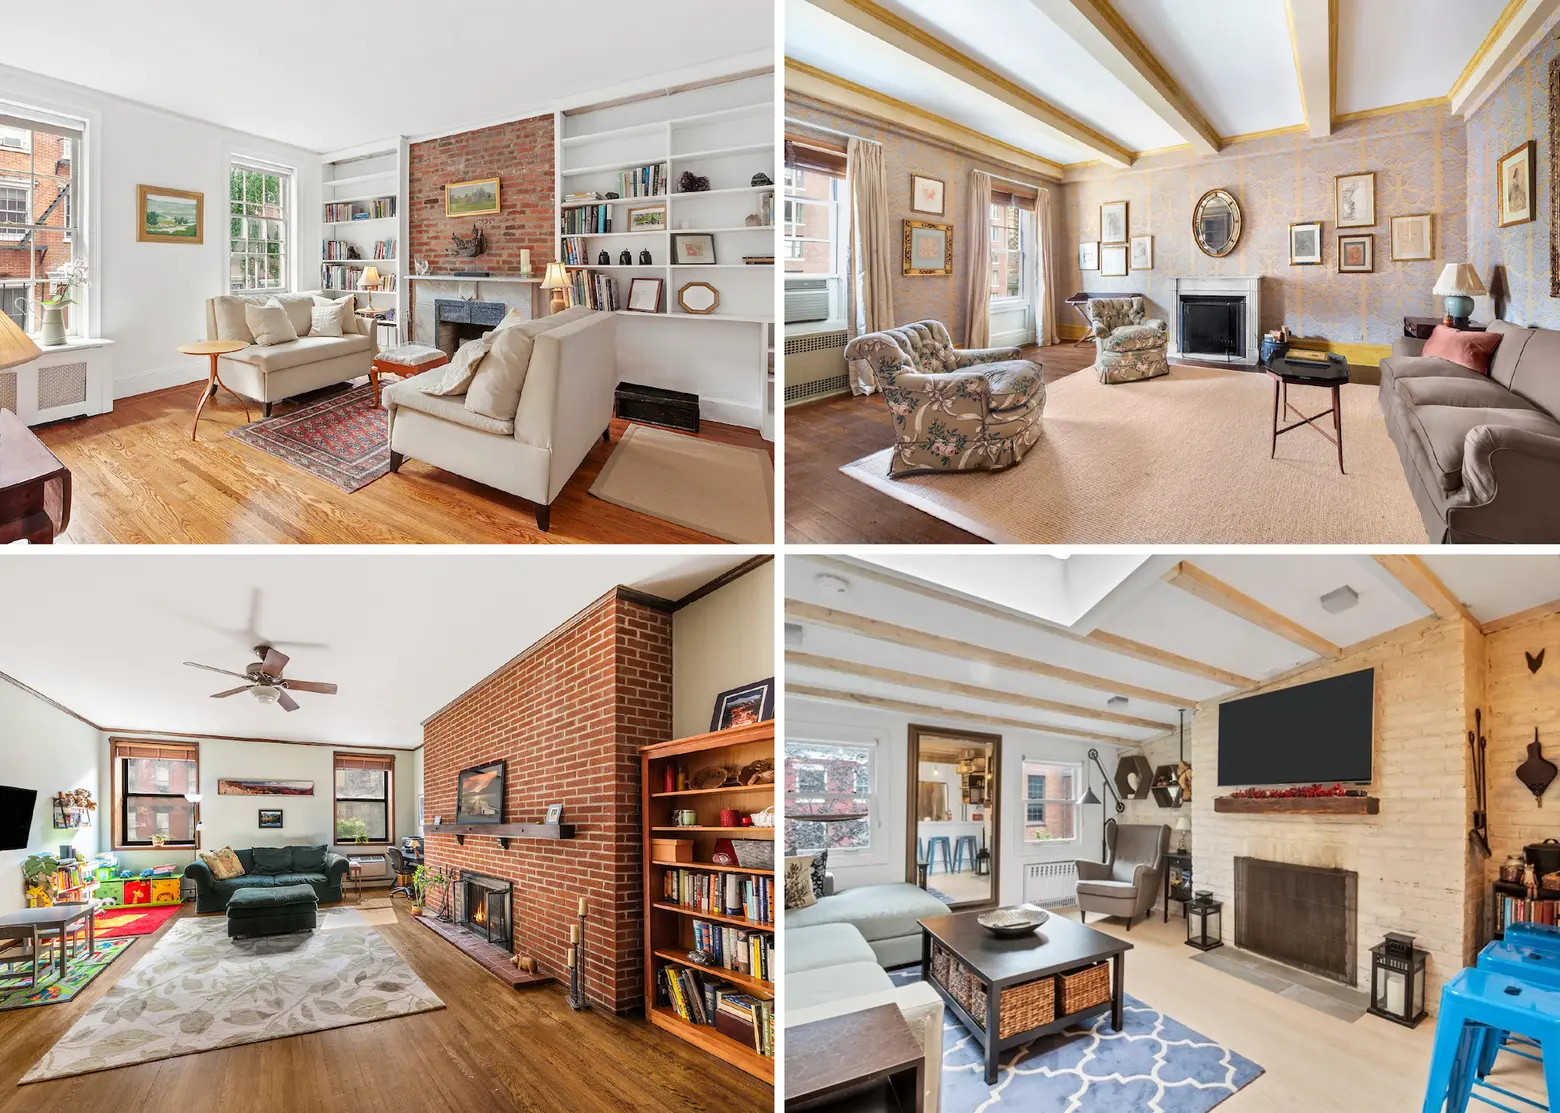 7 NYC apartments with fireplaces for under $1M